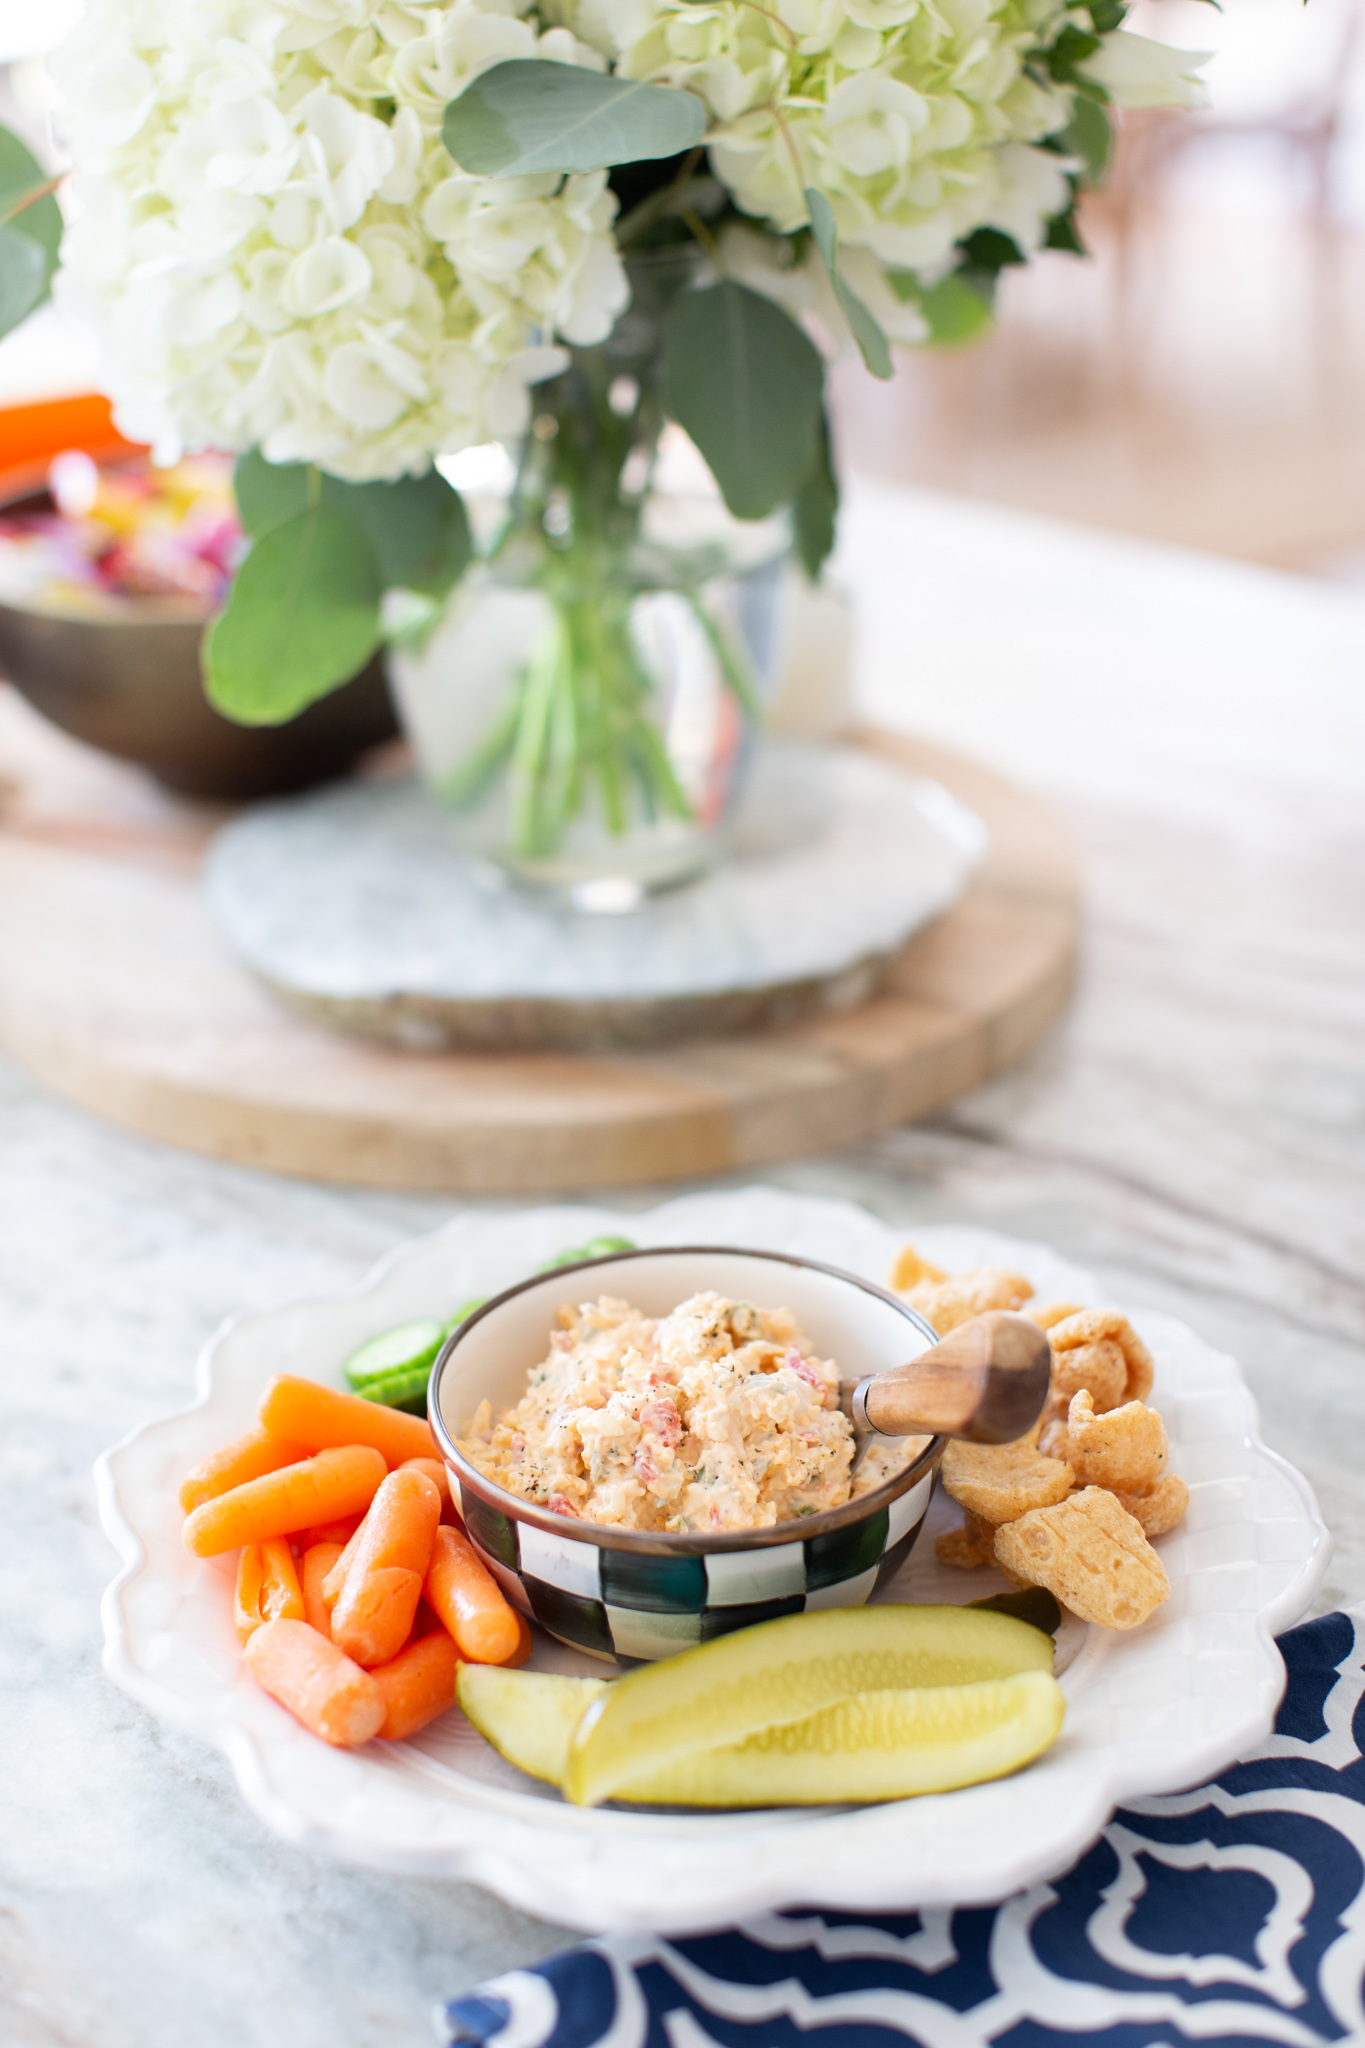 Jalapeno Pimento Cheese by popular Ohio food blog, Coffee Beans and Bobby Pins: image of a white plate with a bowl of jalapeno pimento cheese, baby carrots, English cucumber slices, pickle spears, and chips. 